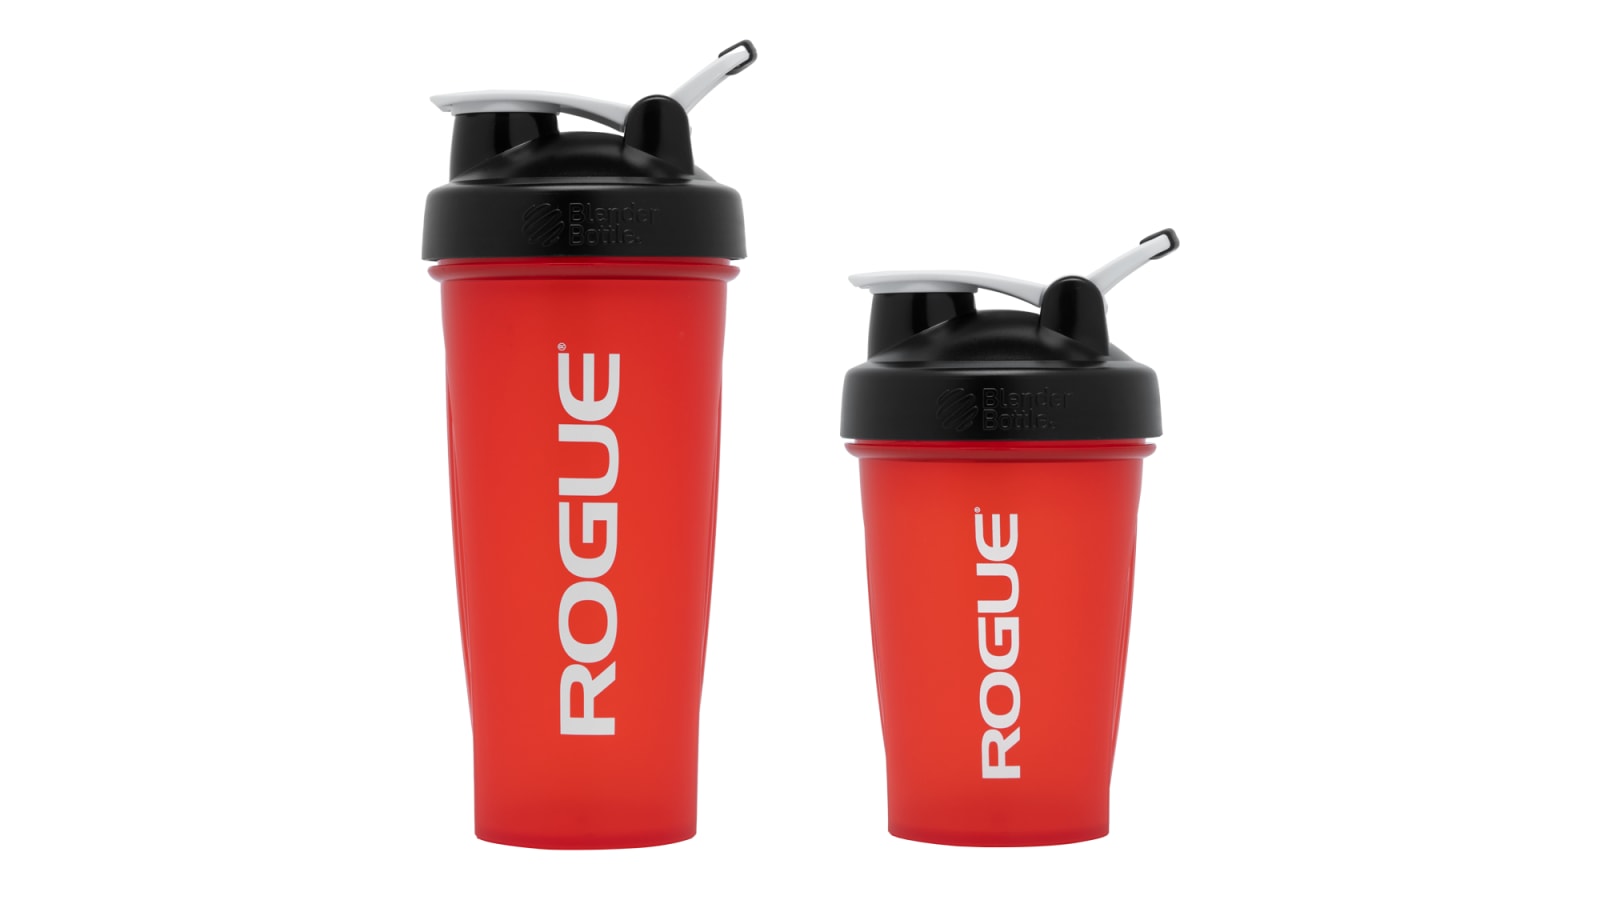 https://assets.roguefitness.com/f_auto,q_auto,c_limit,w_1600,b_rgb:ffffff/catalog/Gear%20and%20Accessories/Accessories/Shakers%20and%20Bottles/BB000R/BB000R-H_dc0k45.png